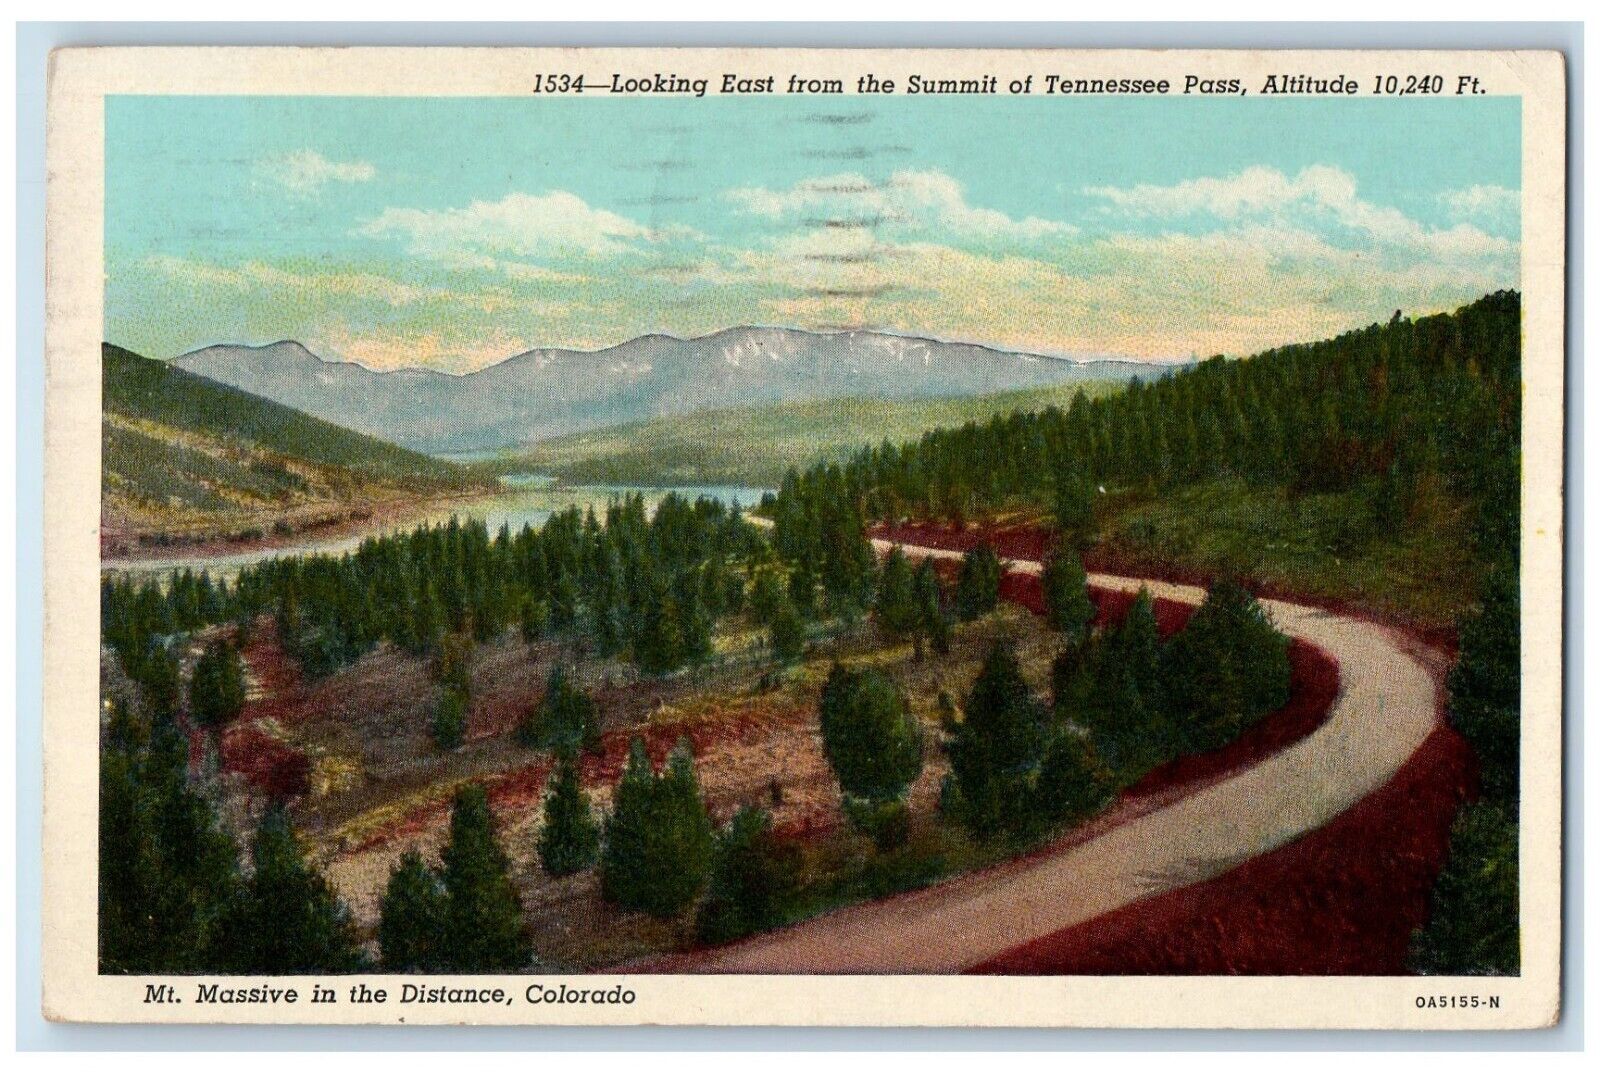 1955 Looking East Summit Tennessee Pass Mt Massive Denver Colorado CO Postcard